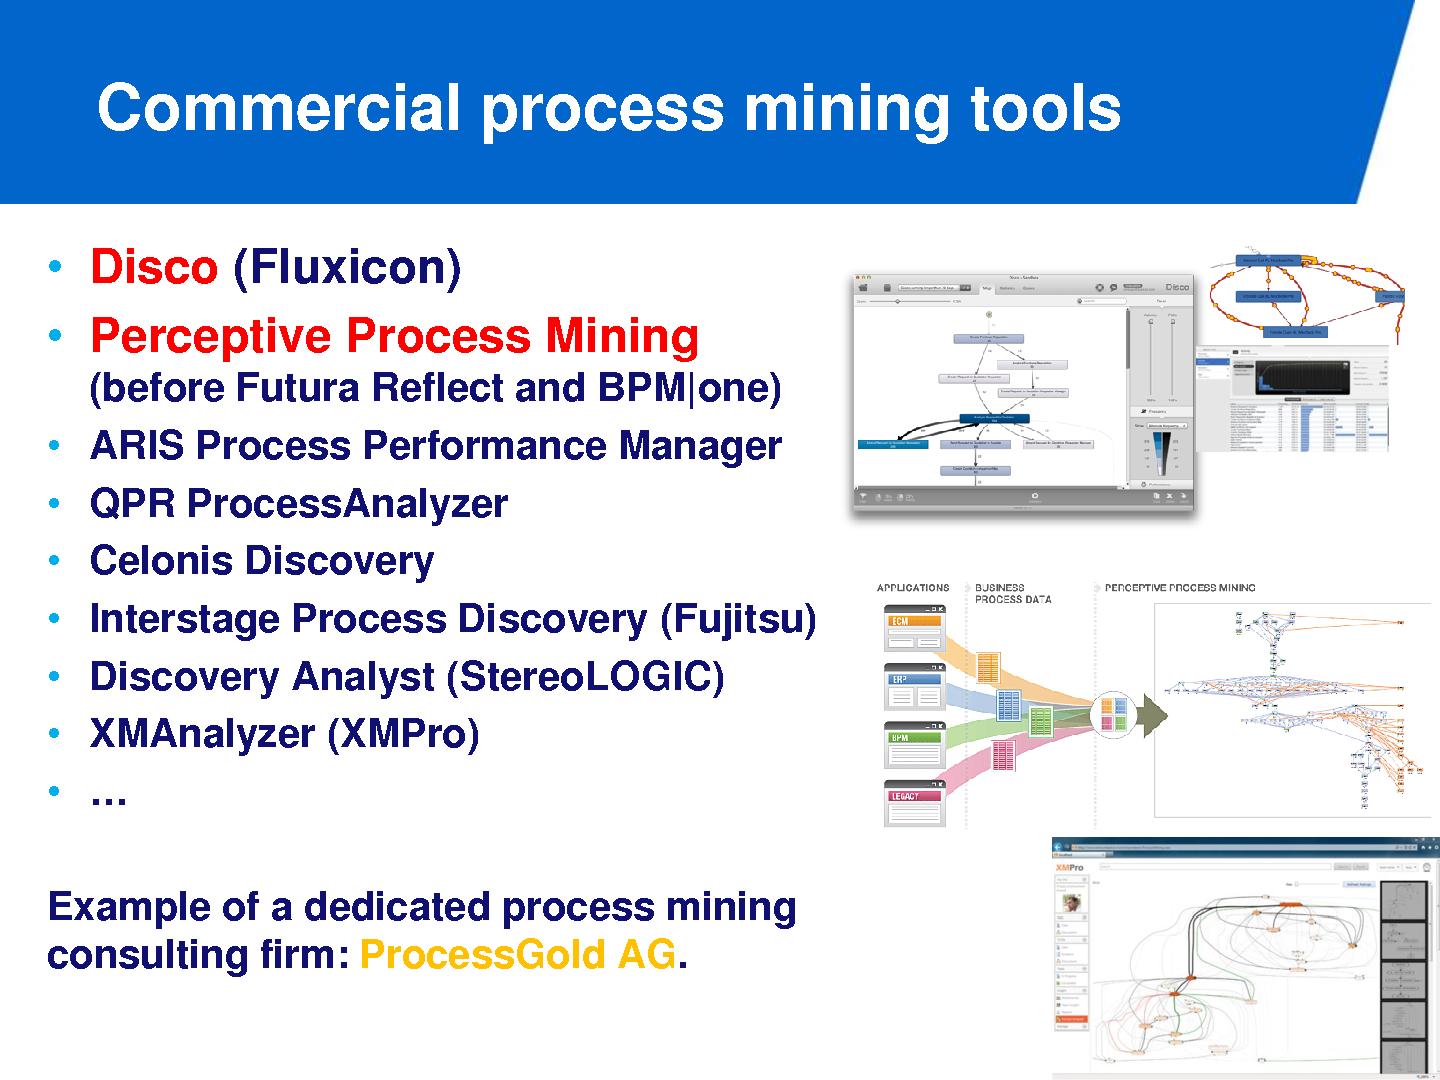 Файл:«Mine Your Own Business» — Using Process Mining to Turn Big Data into Real Value (Wil van der Aalst, SECR-2013).pdf